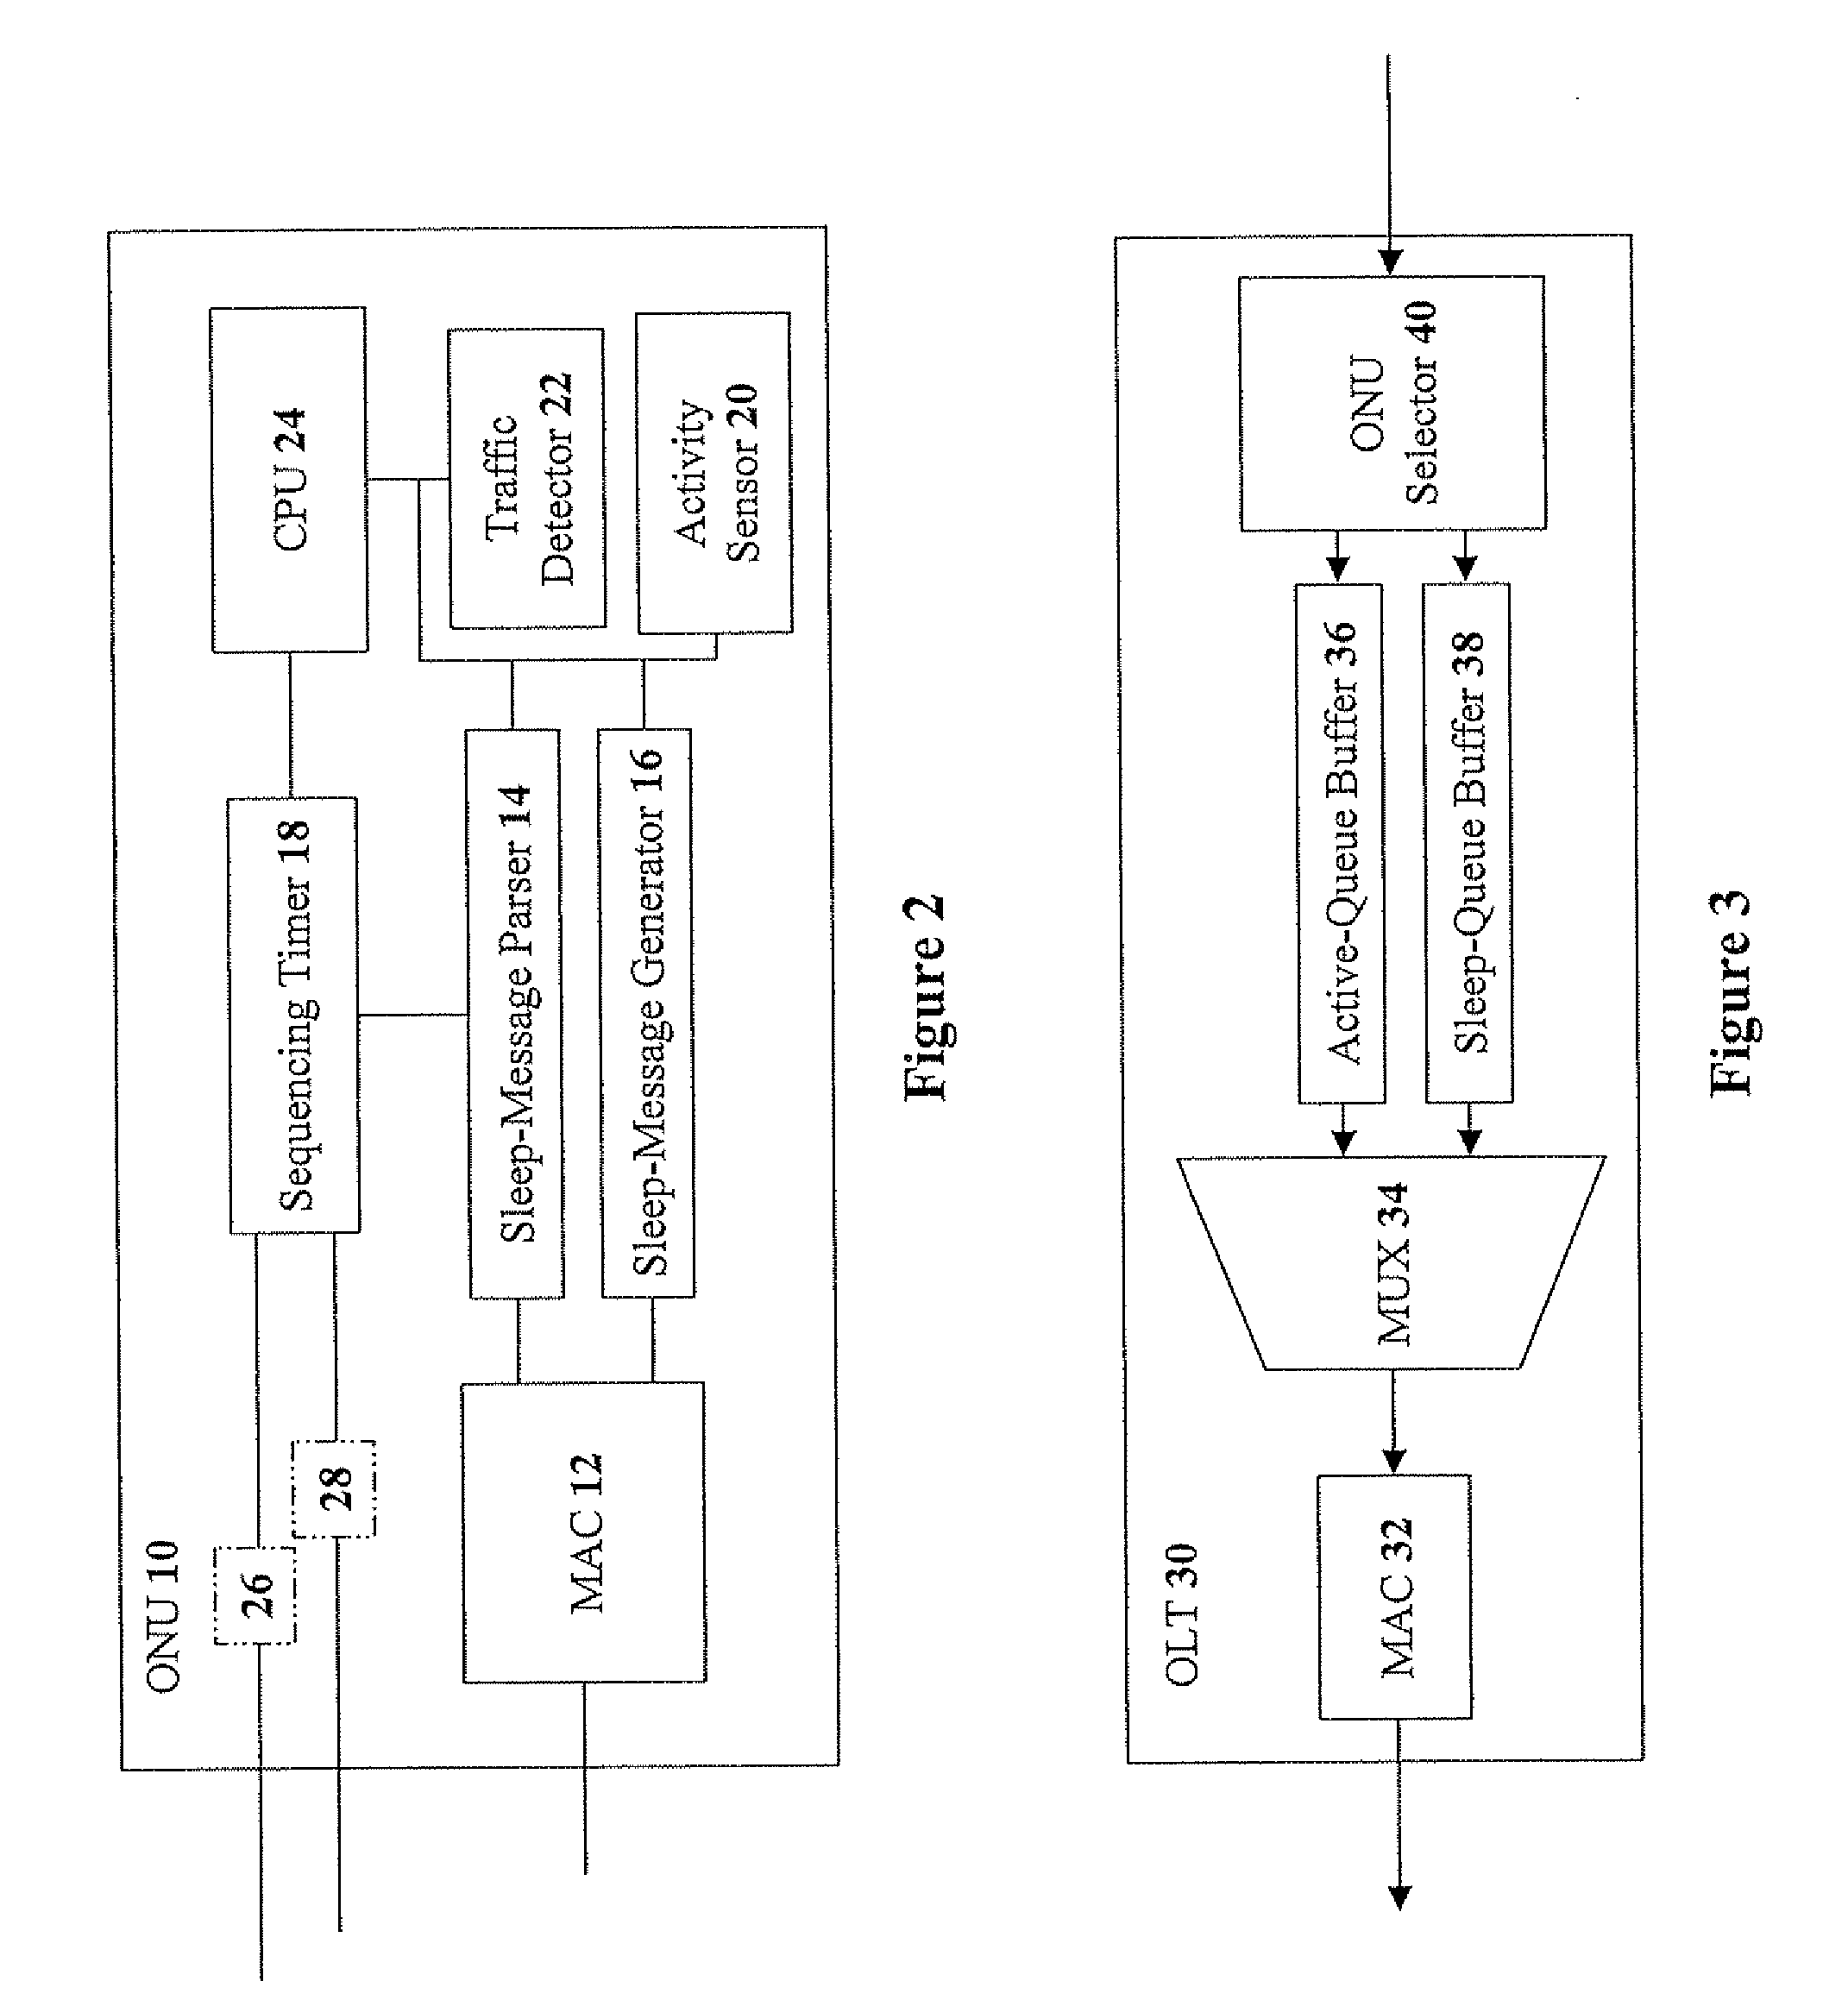 Methods and devices for reducing power consumption in a passive optical network while maintaining service continuity